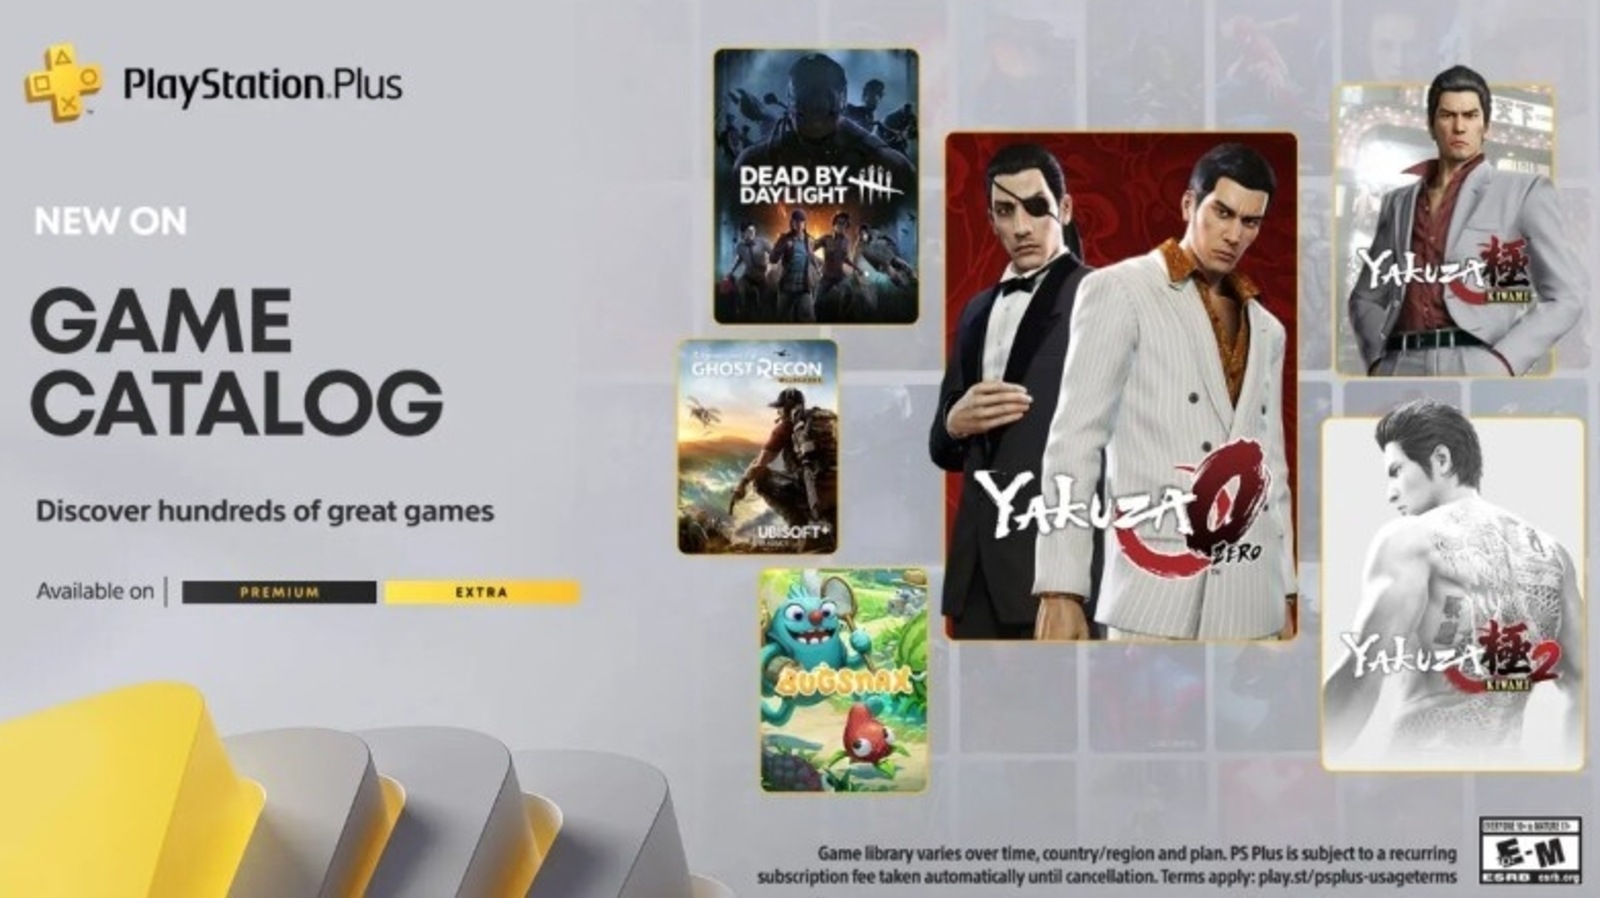 PlayStation Plus August 2022 Games: Dead by Daylight, Ghost Recon Wildlands, Yakuza 0 and more | Gaming News